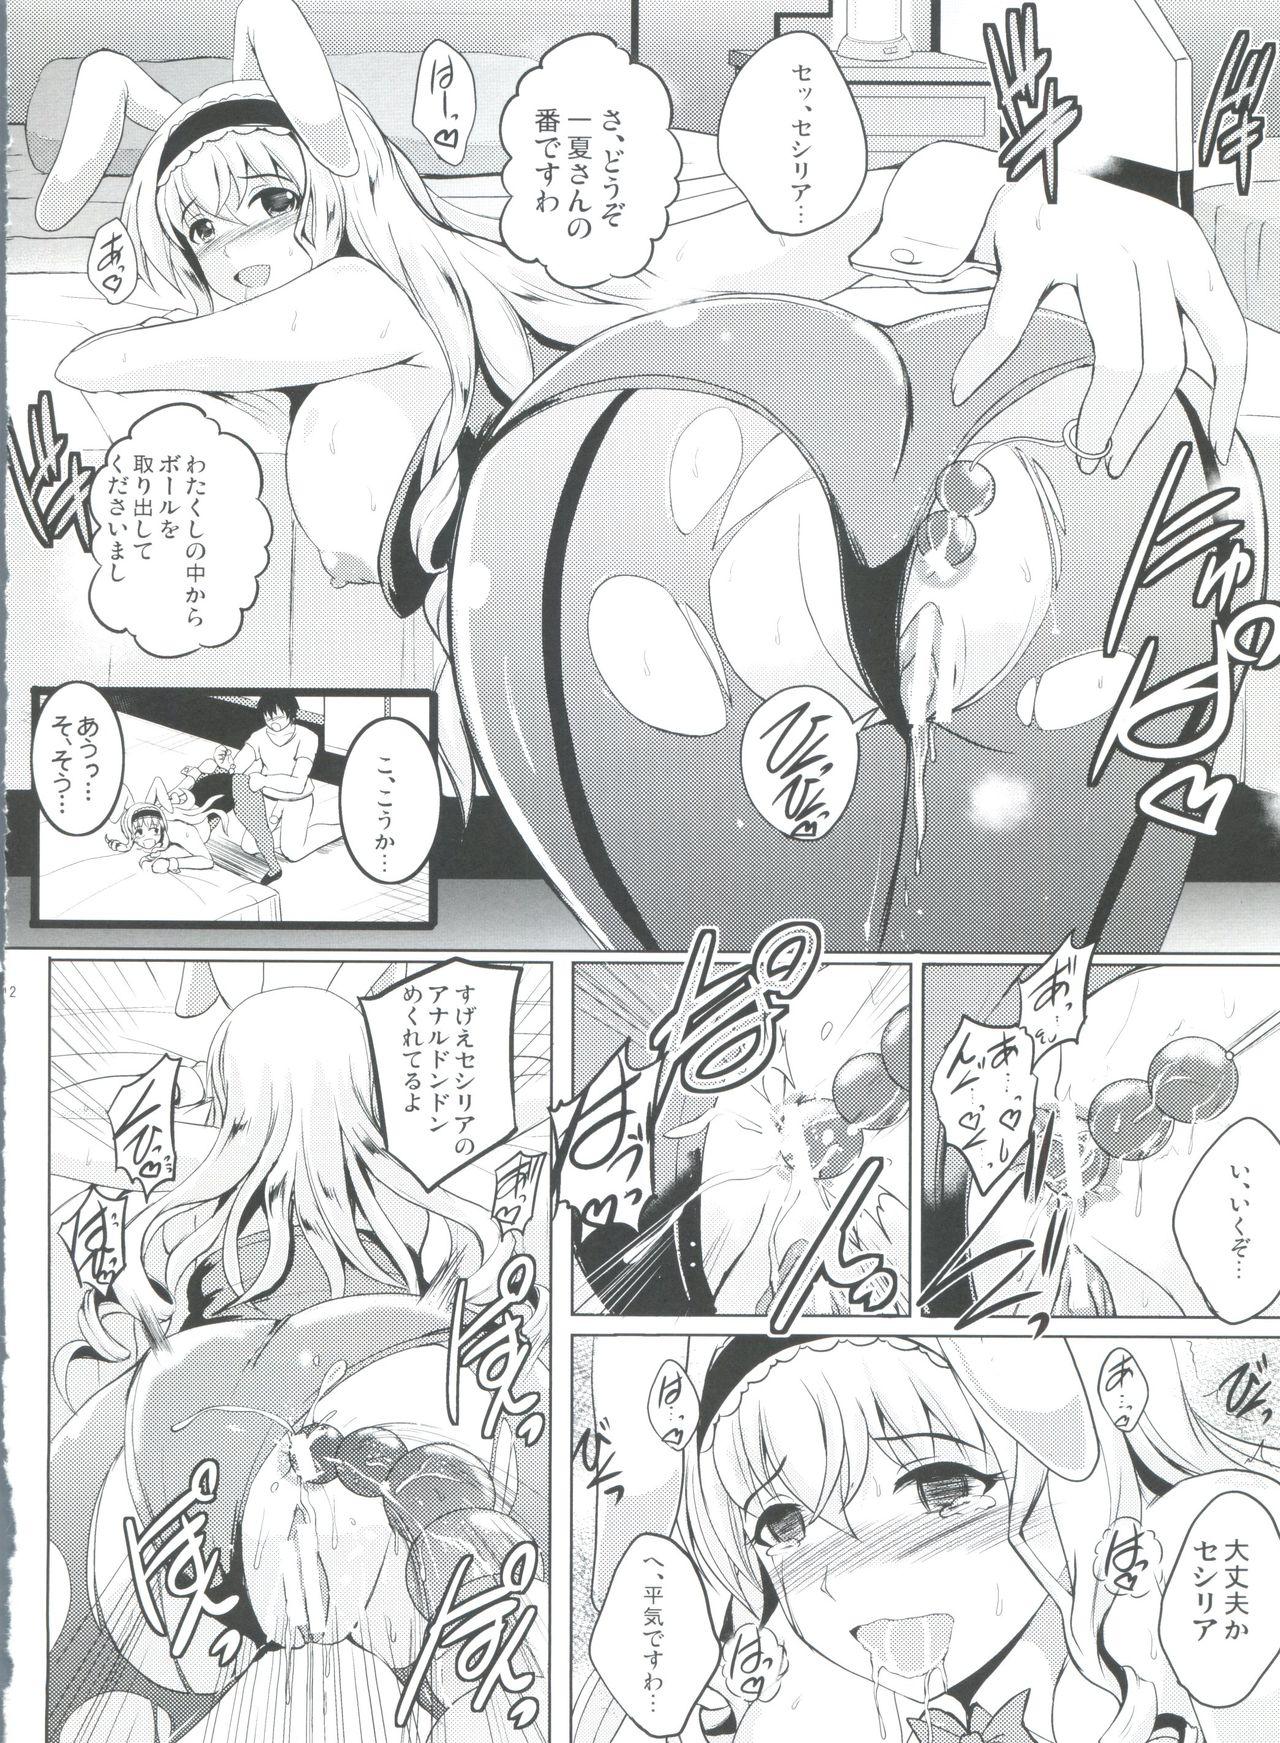 Porn Star Poodle & Bunny Time - Infinite stratos Pussyeating - Page 11